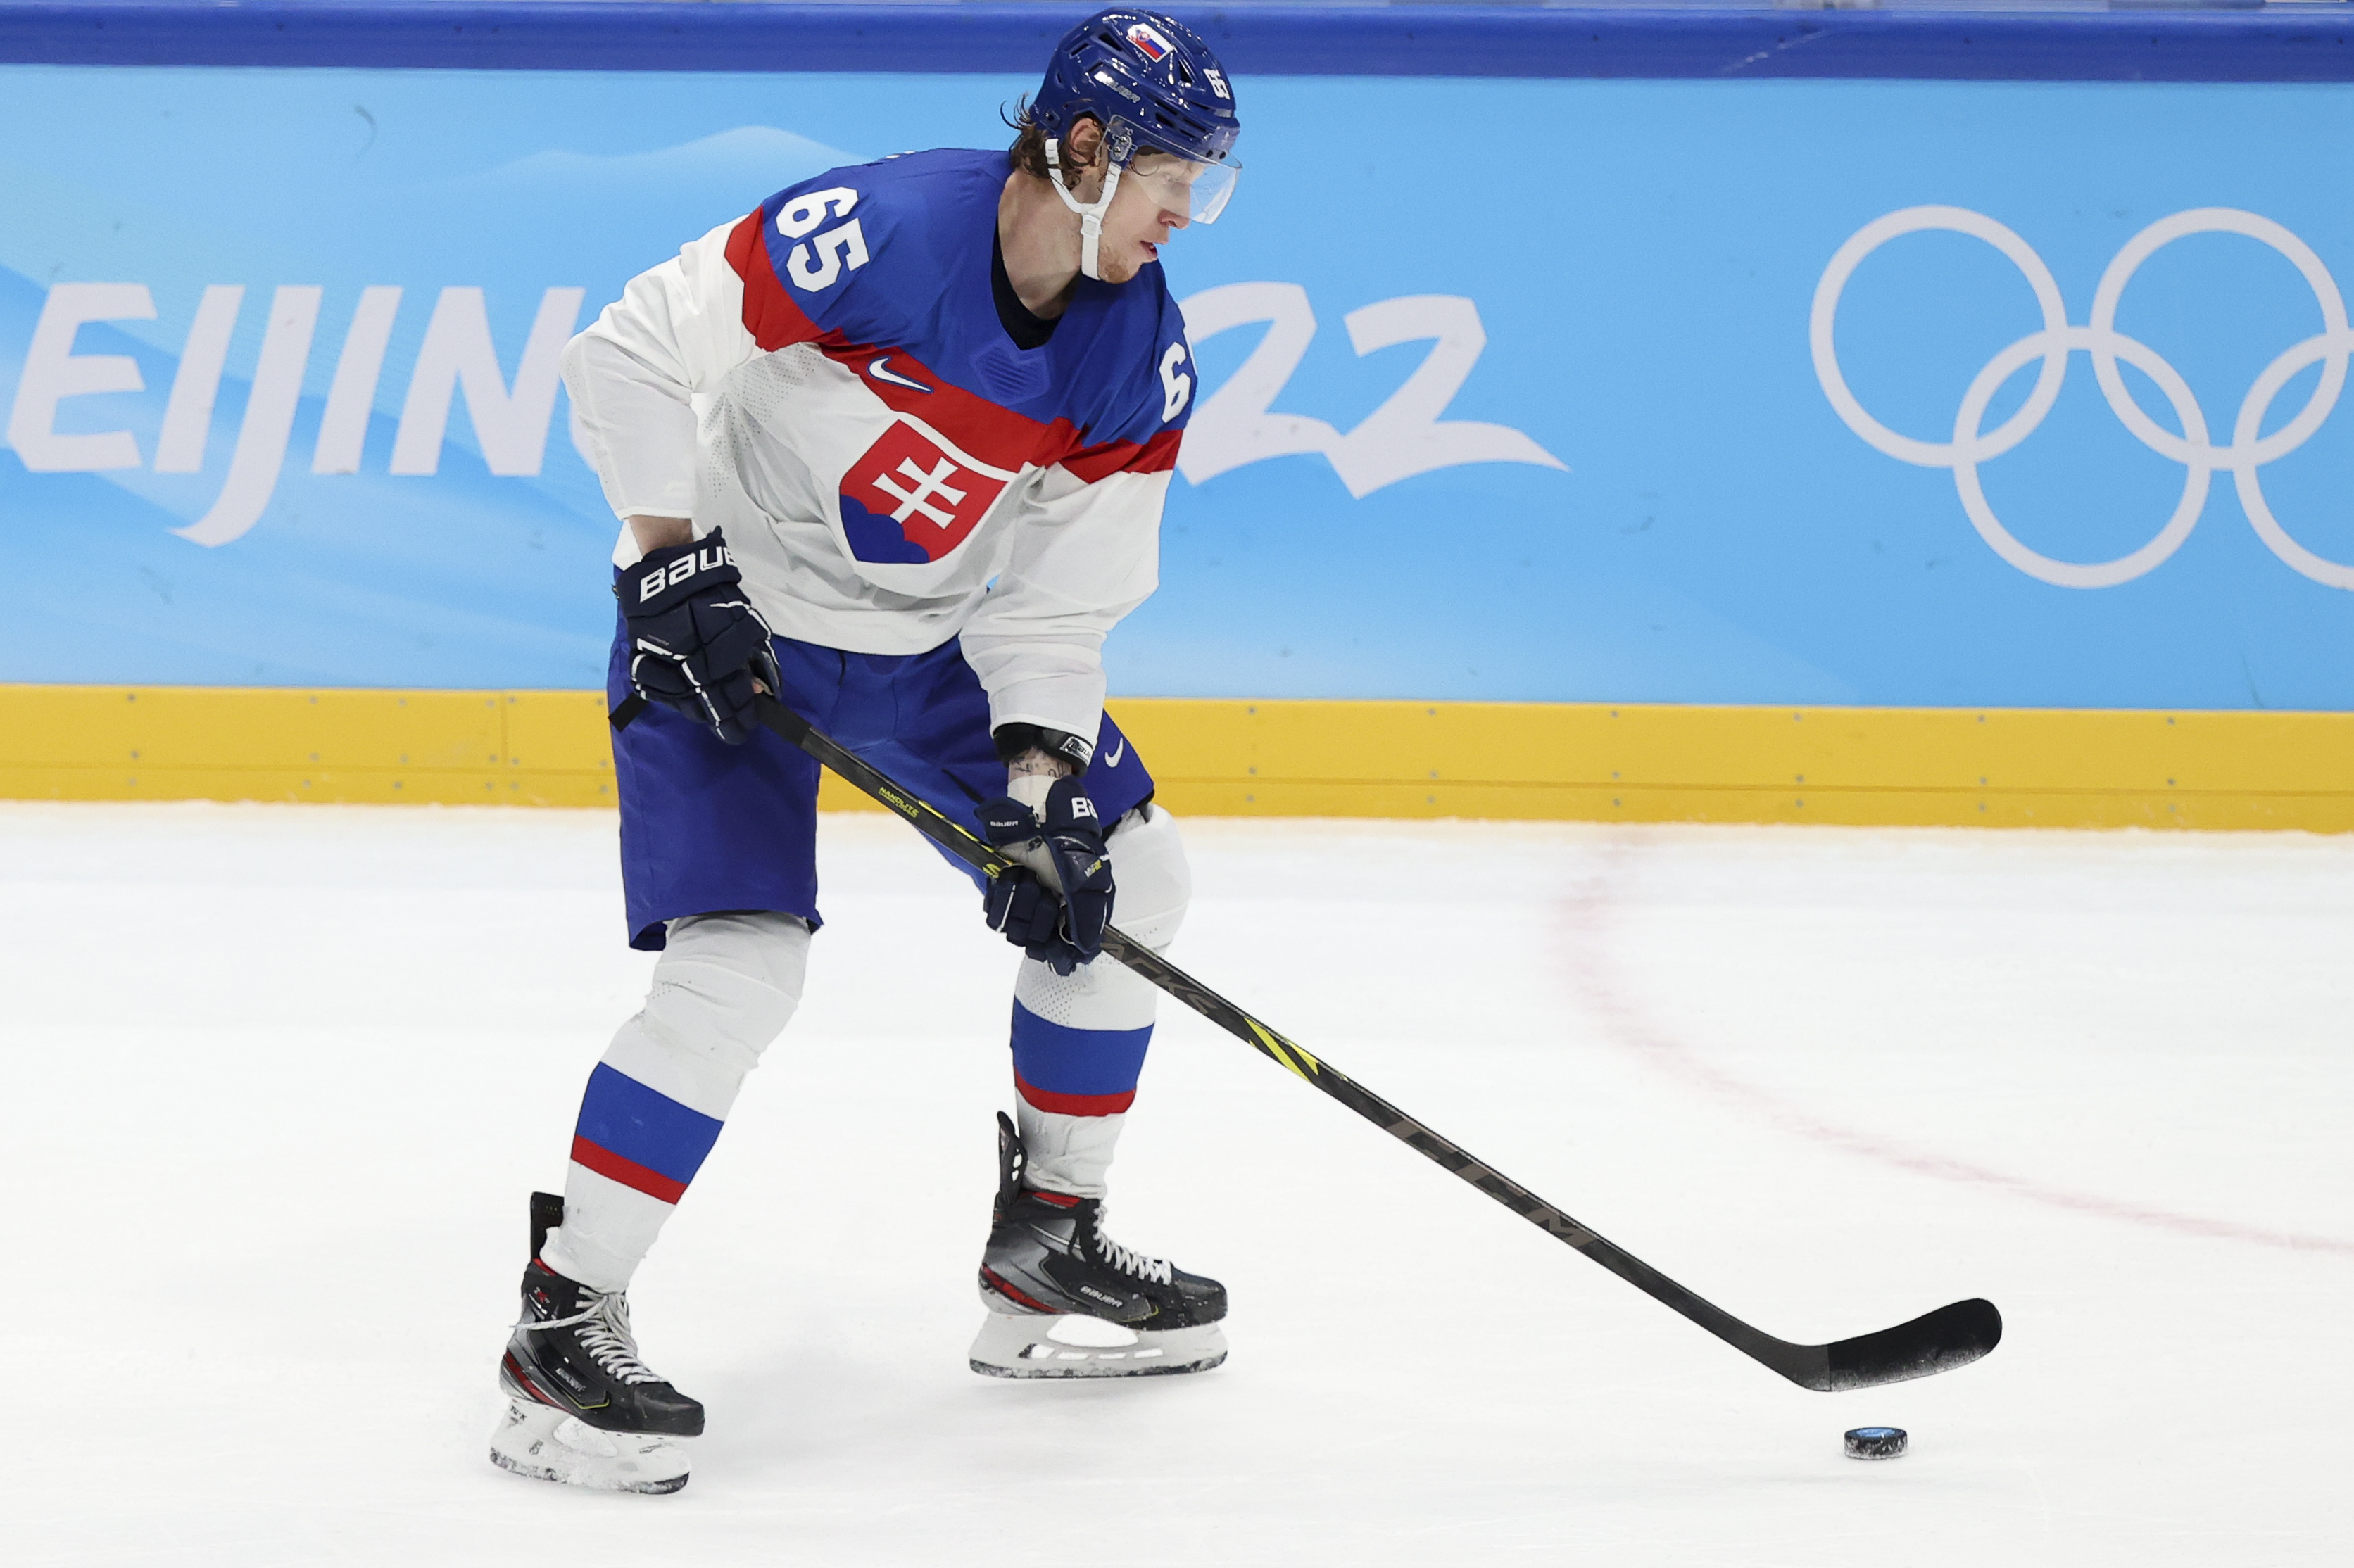 Michal Cajkovsky of Slovakia during the Men’s Ice Hockey Playoff Semifinal match between Team Finland and Team Slovakia on Day 14 of the Beijing 2022 Winter Olympic Games at National Indoor Stadium on February 18, 2022 in Beijing, China.